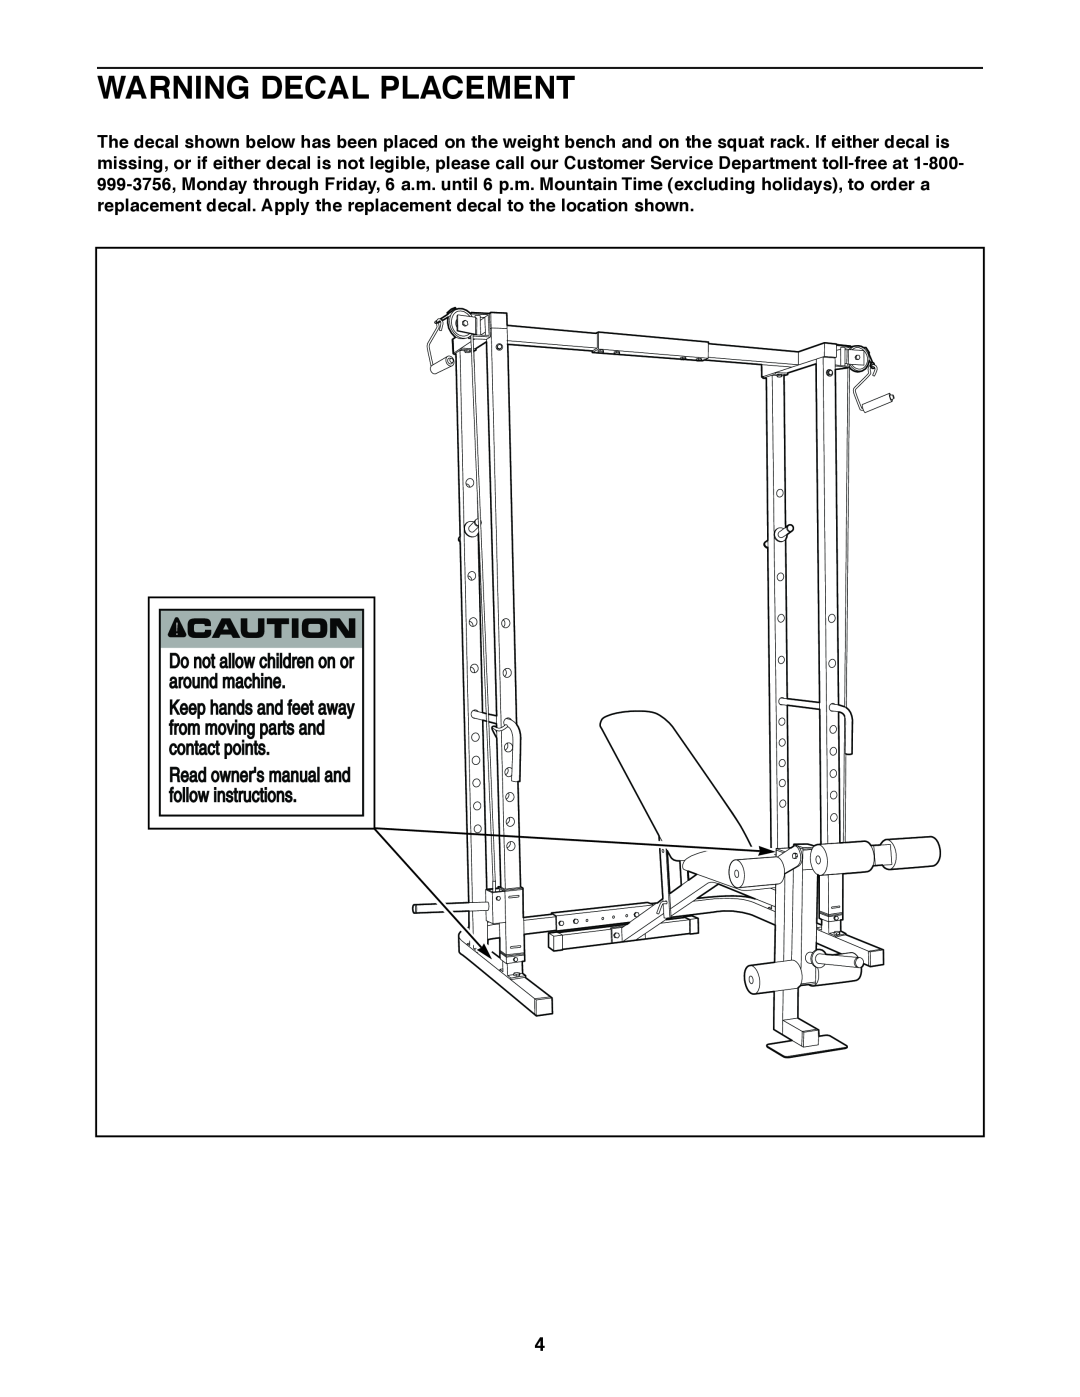 Weider 831.150470 user manual Warning Decal Placement 